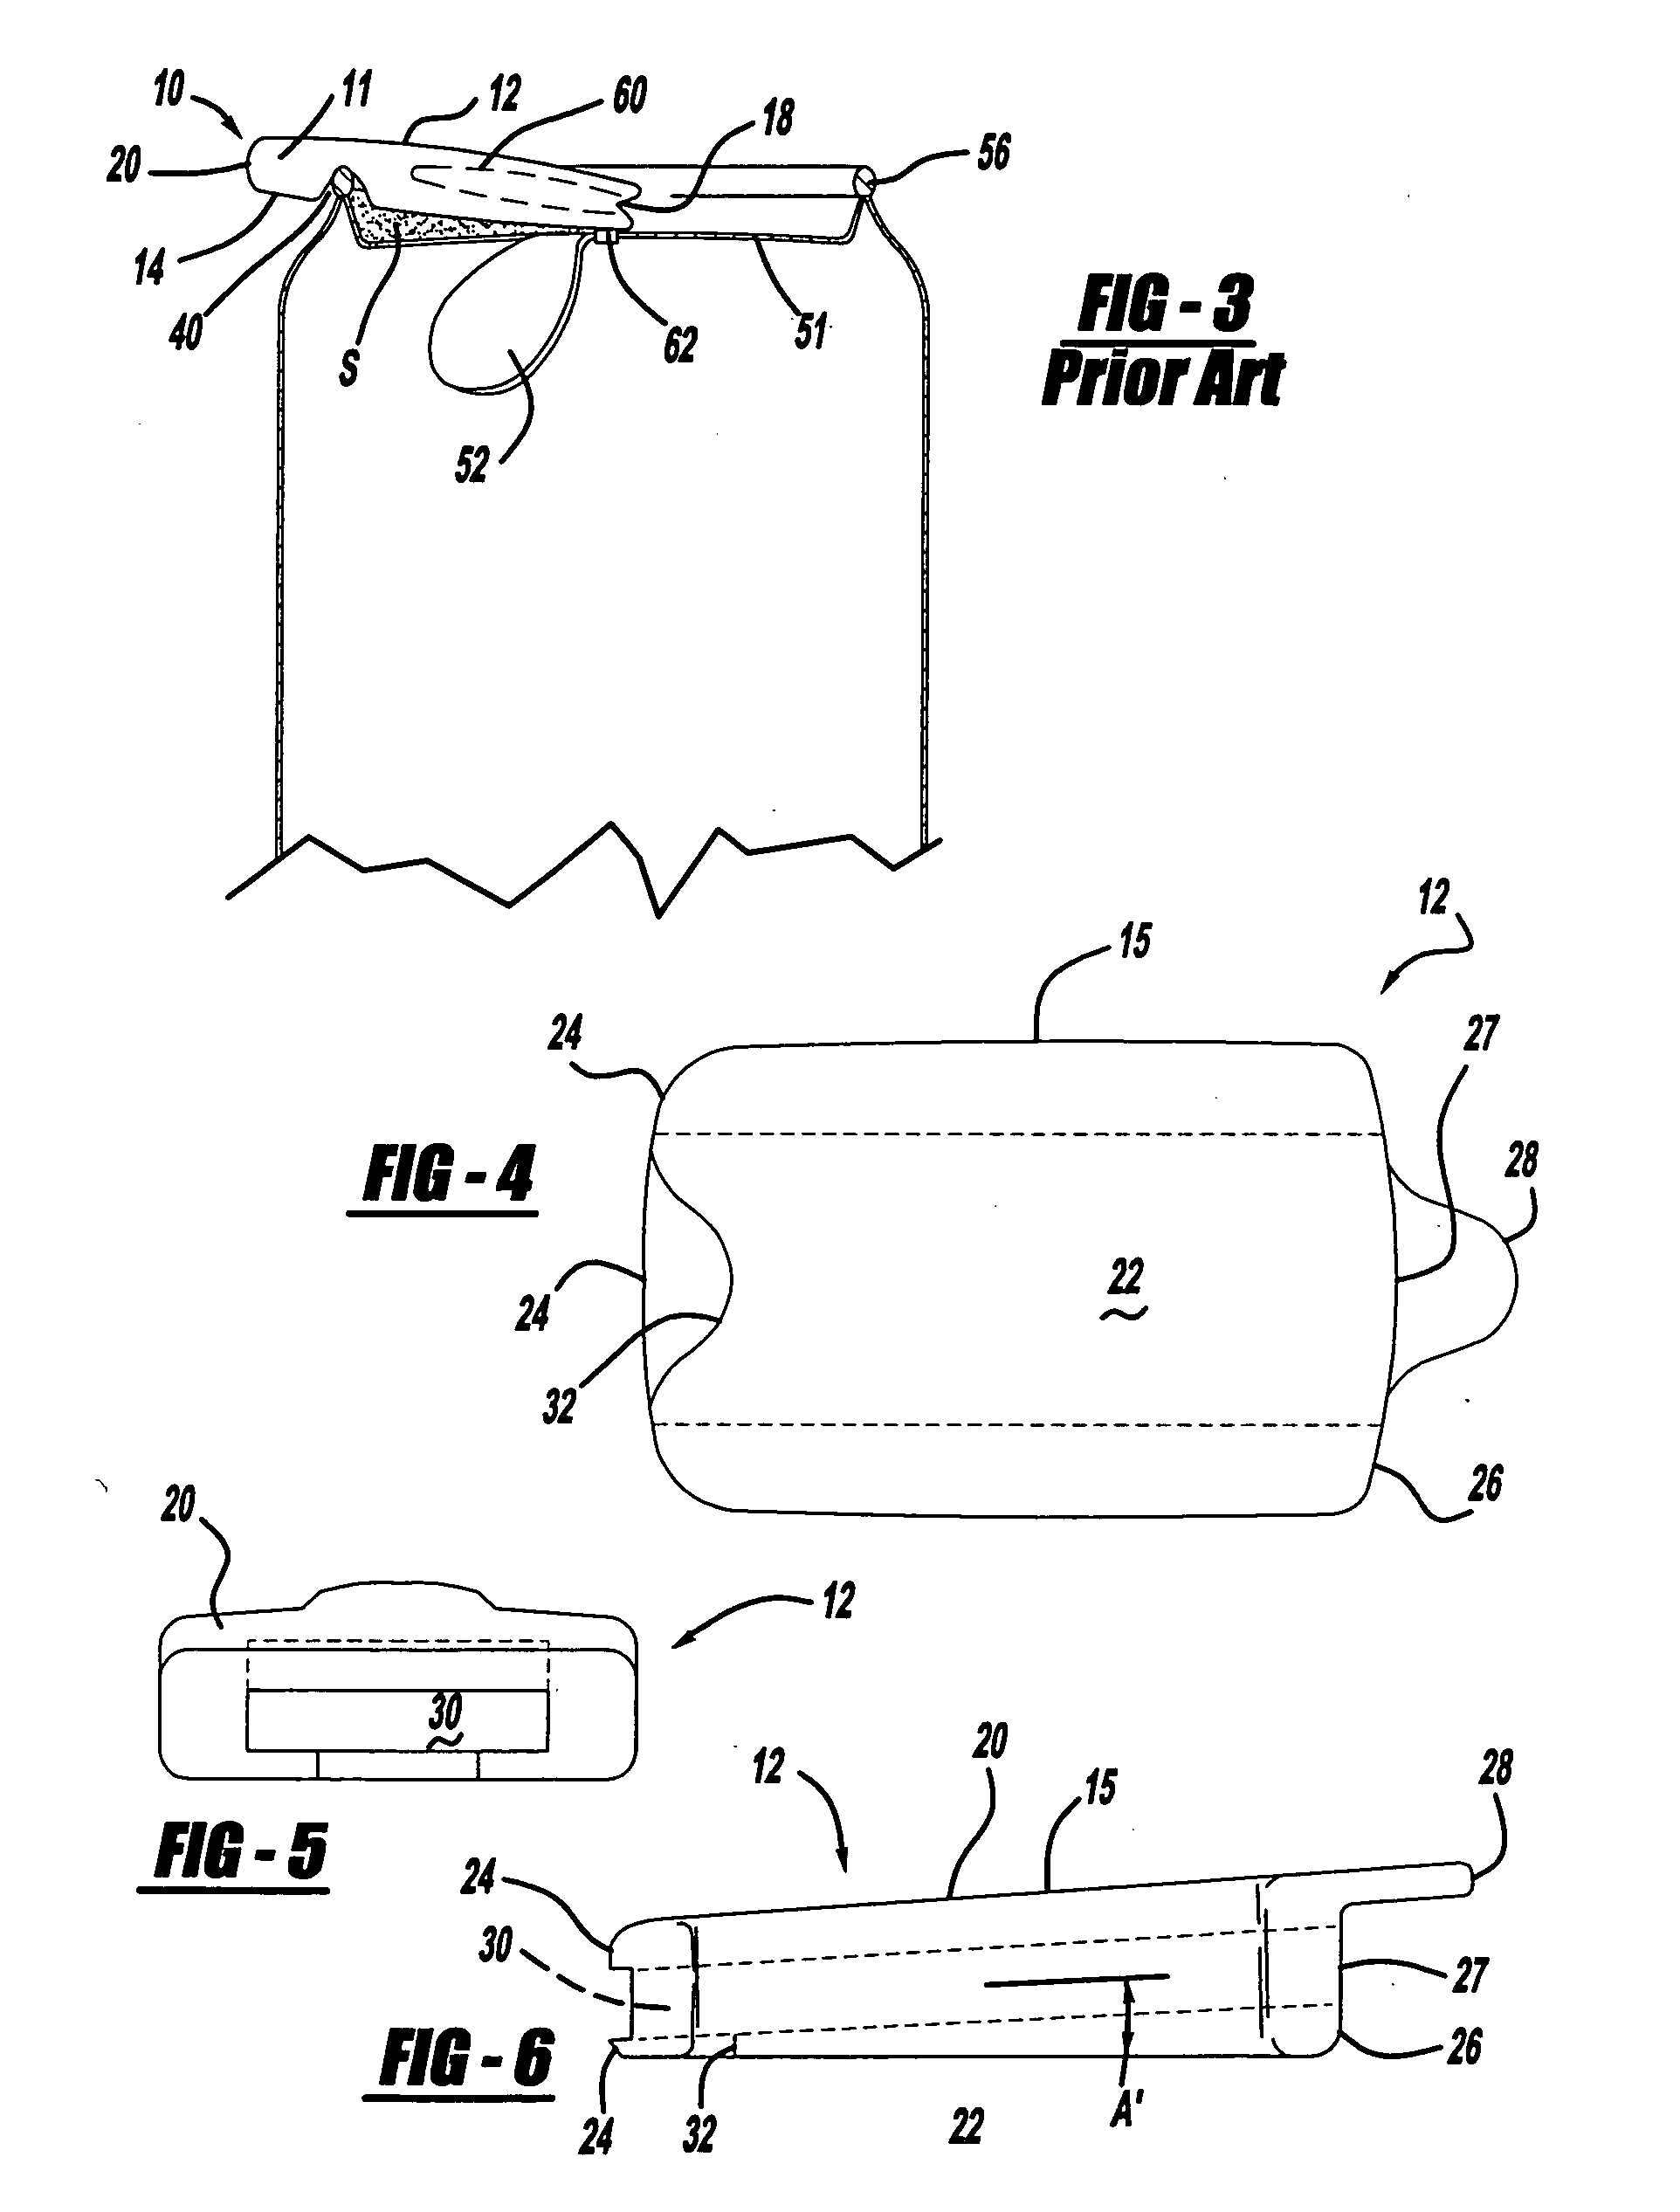 Ring-tab extending sleeve for easy opening and re-closing the opening of a beverage container